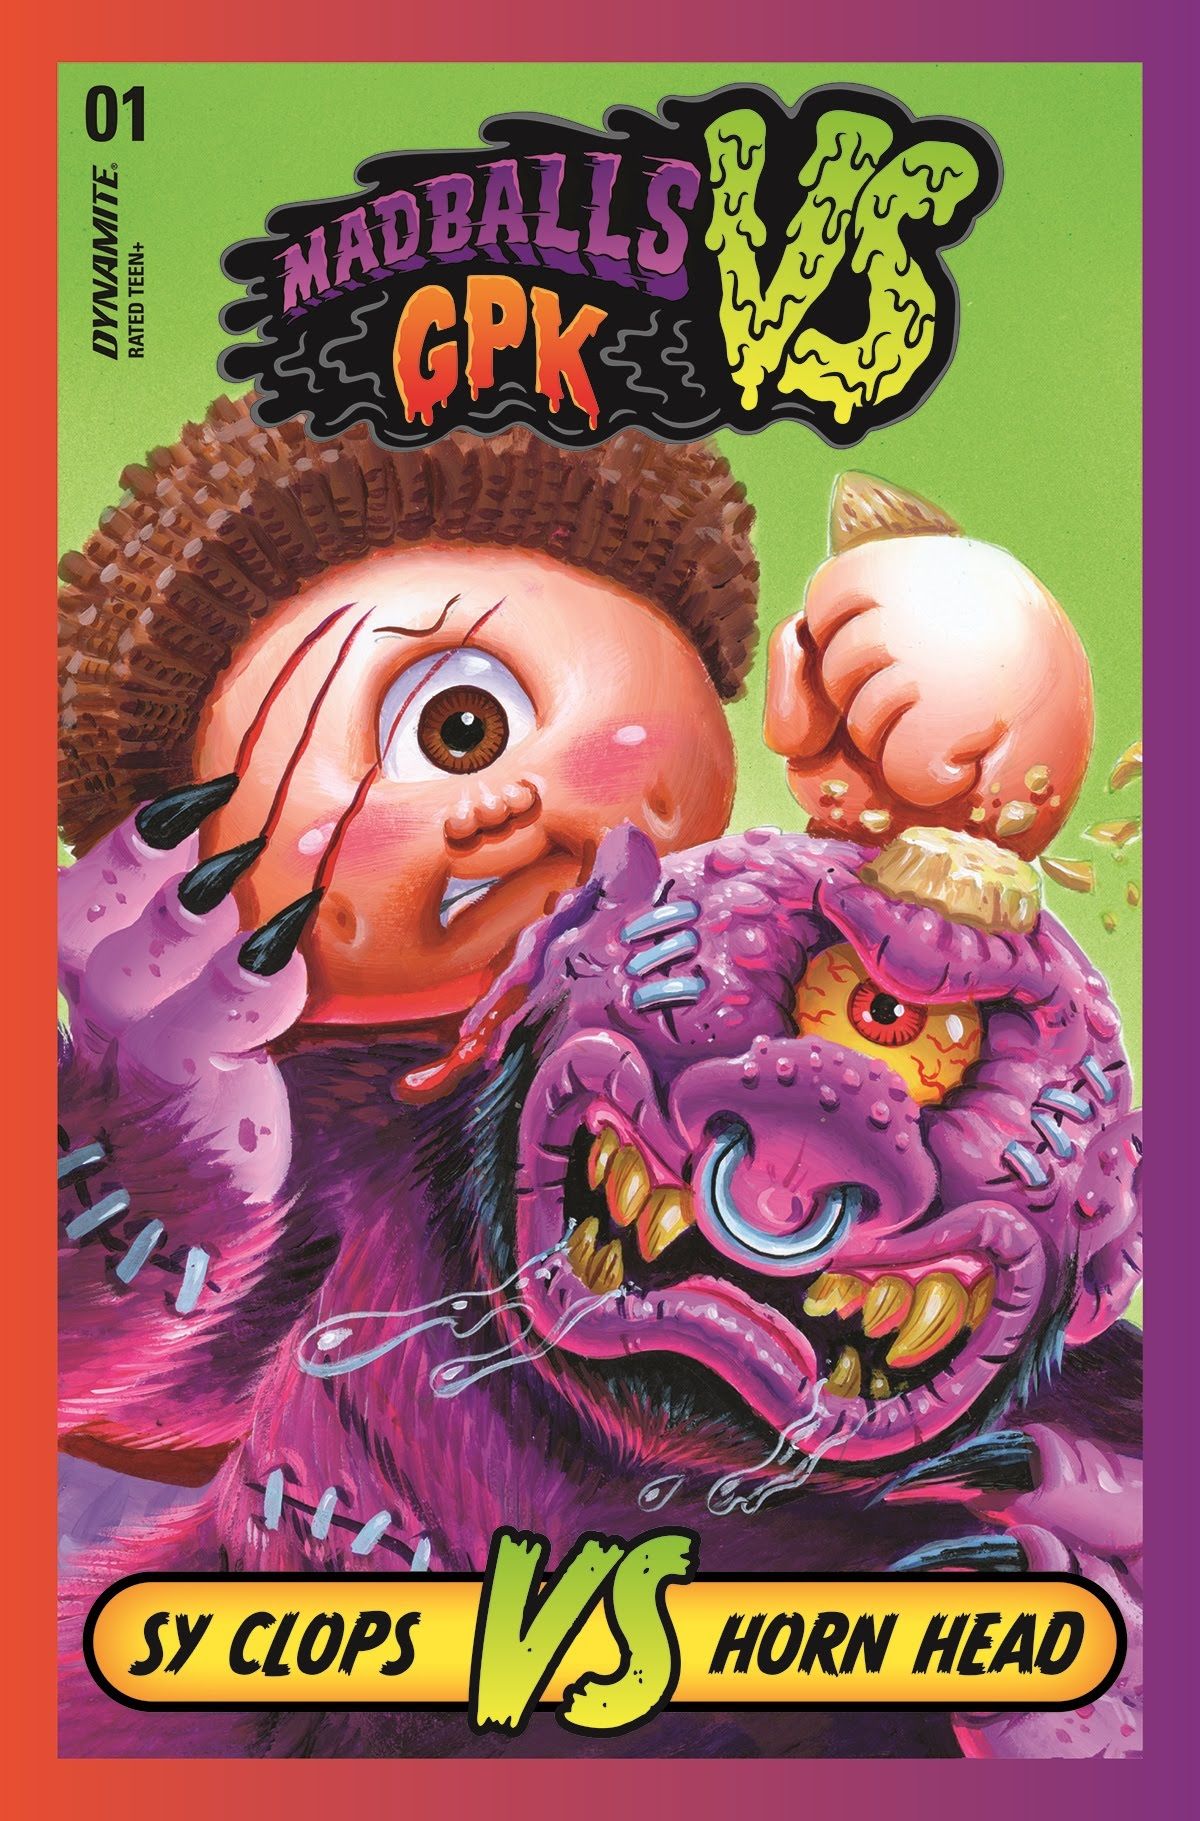 80s Icons Madballs and Garbage Pail Kids Go to War in New Crossover Series